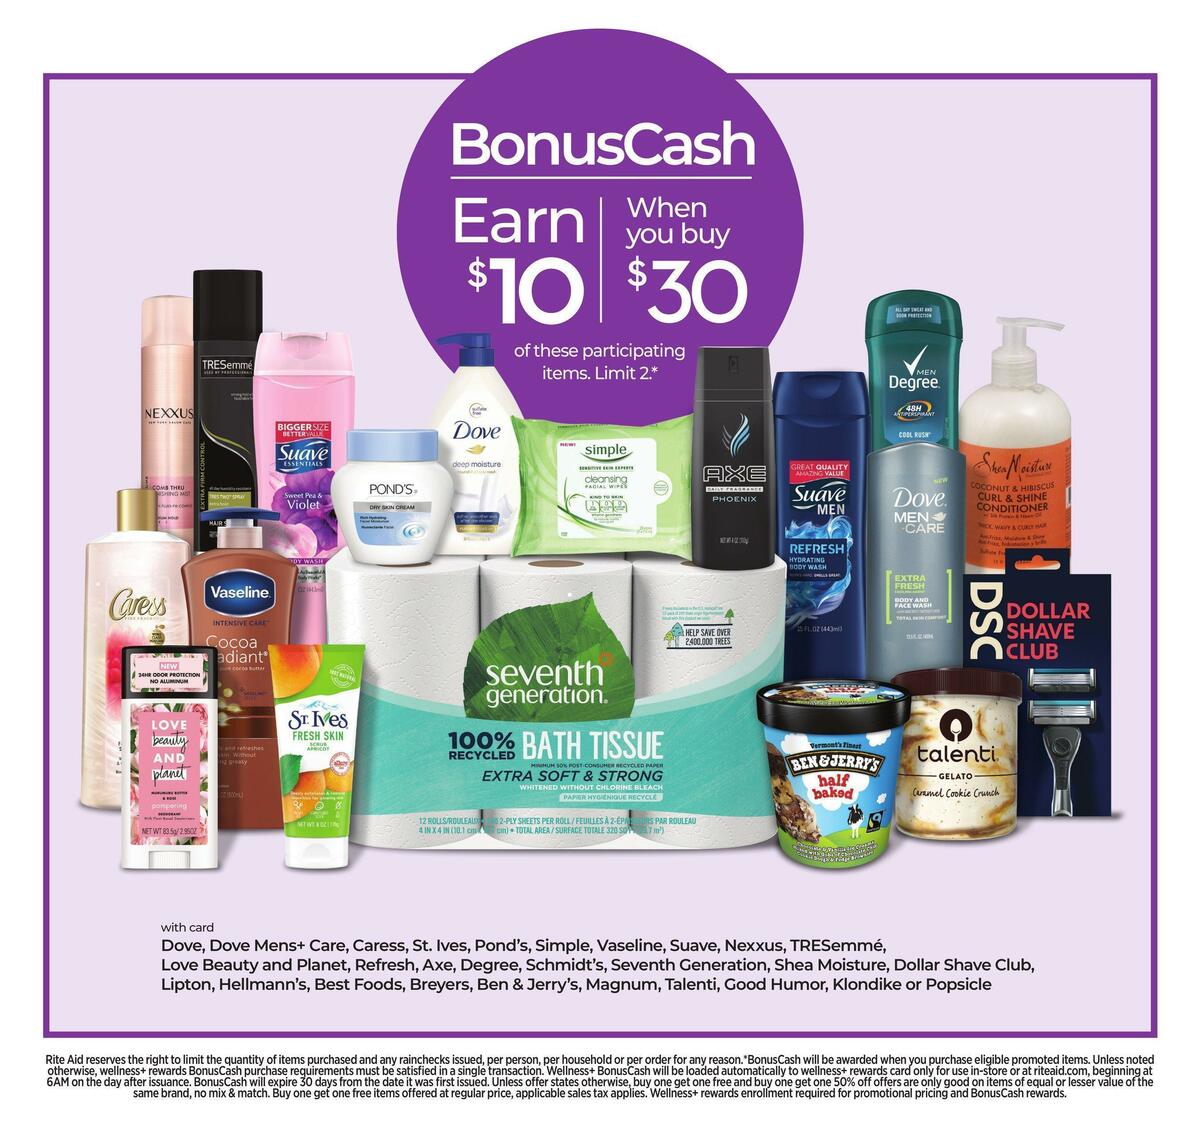 Rite Aid Weekly Ad from August 22